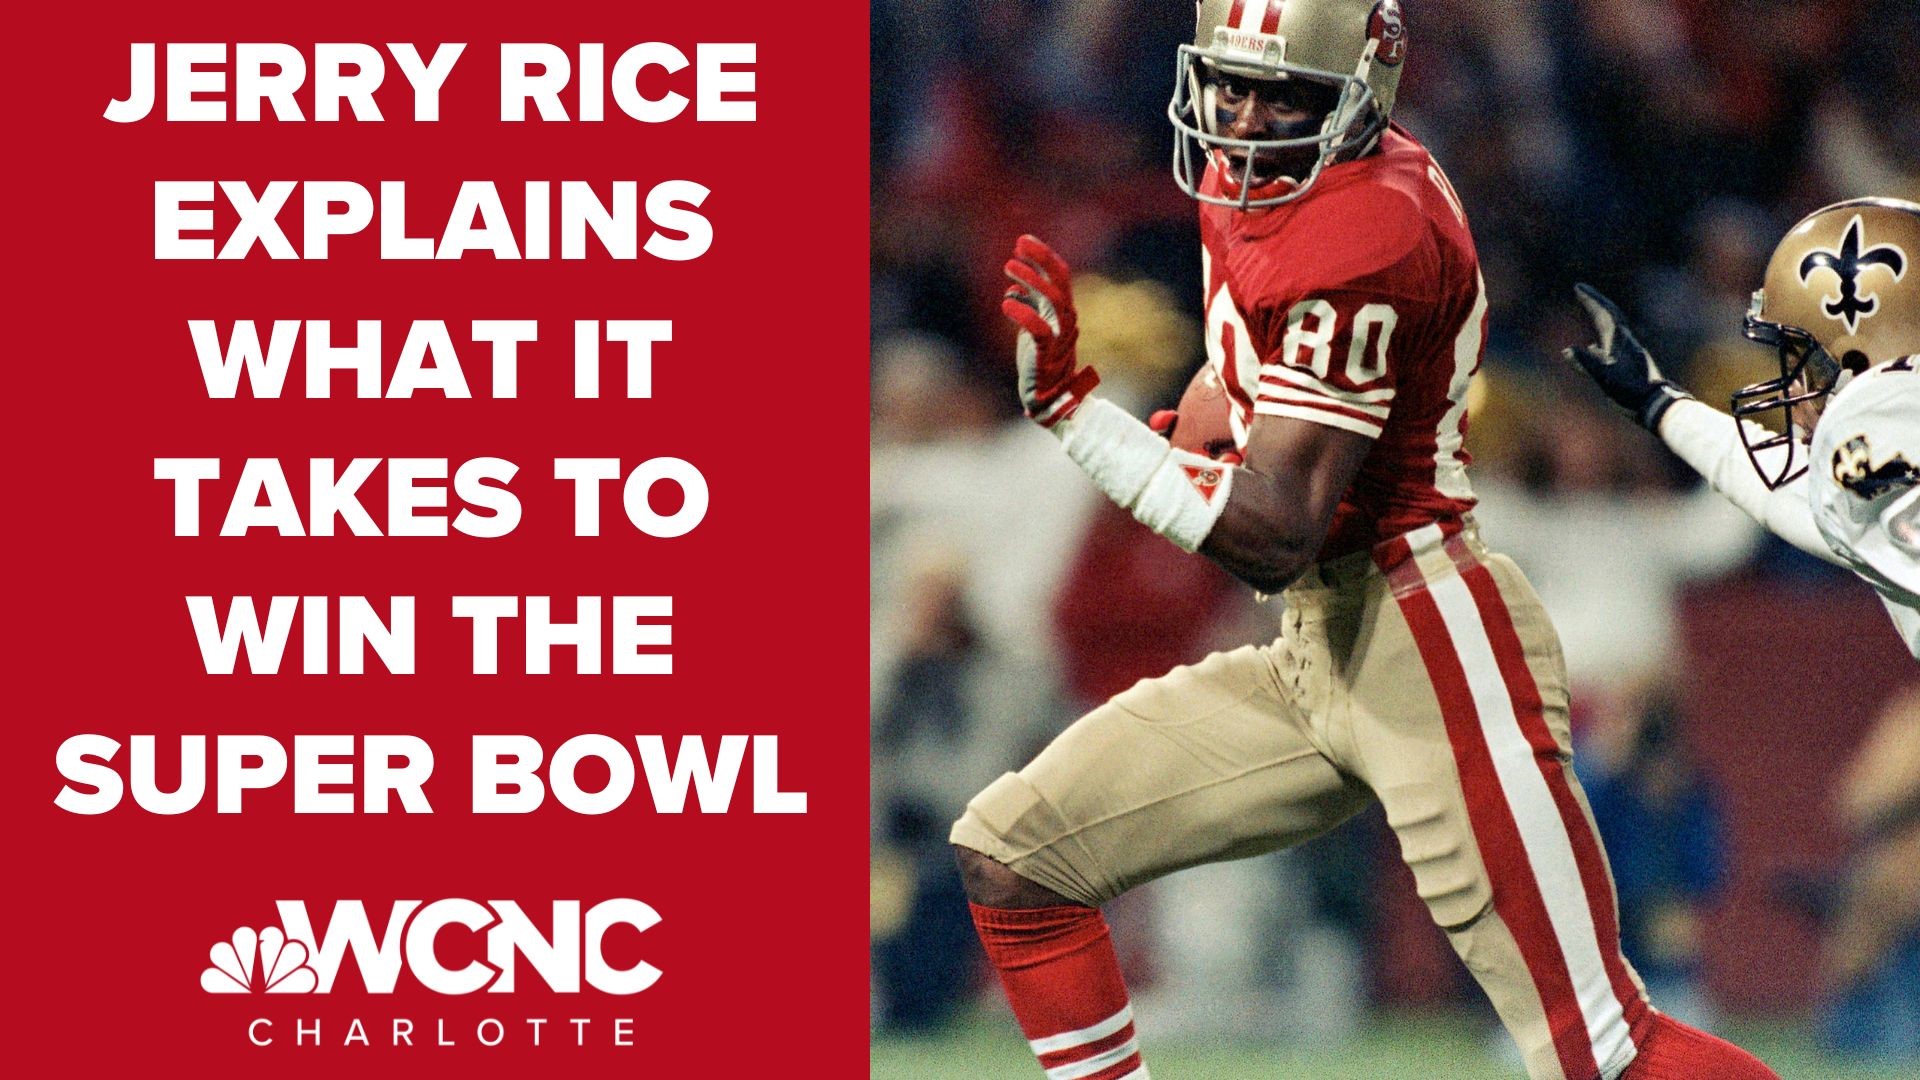 NFL legend Jerry Rice, who won three Super Bowls with the 49ers, discusses what it takes to reach the greatest heights of pro football.